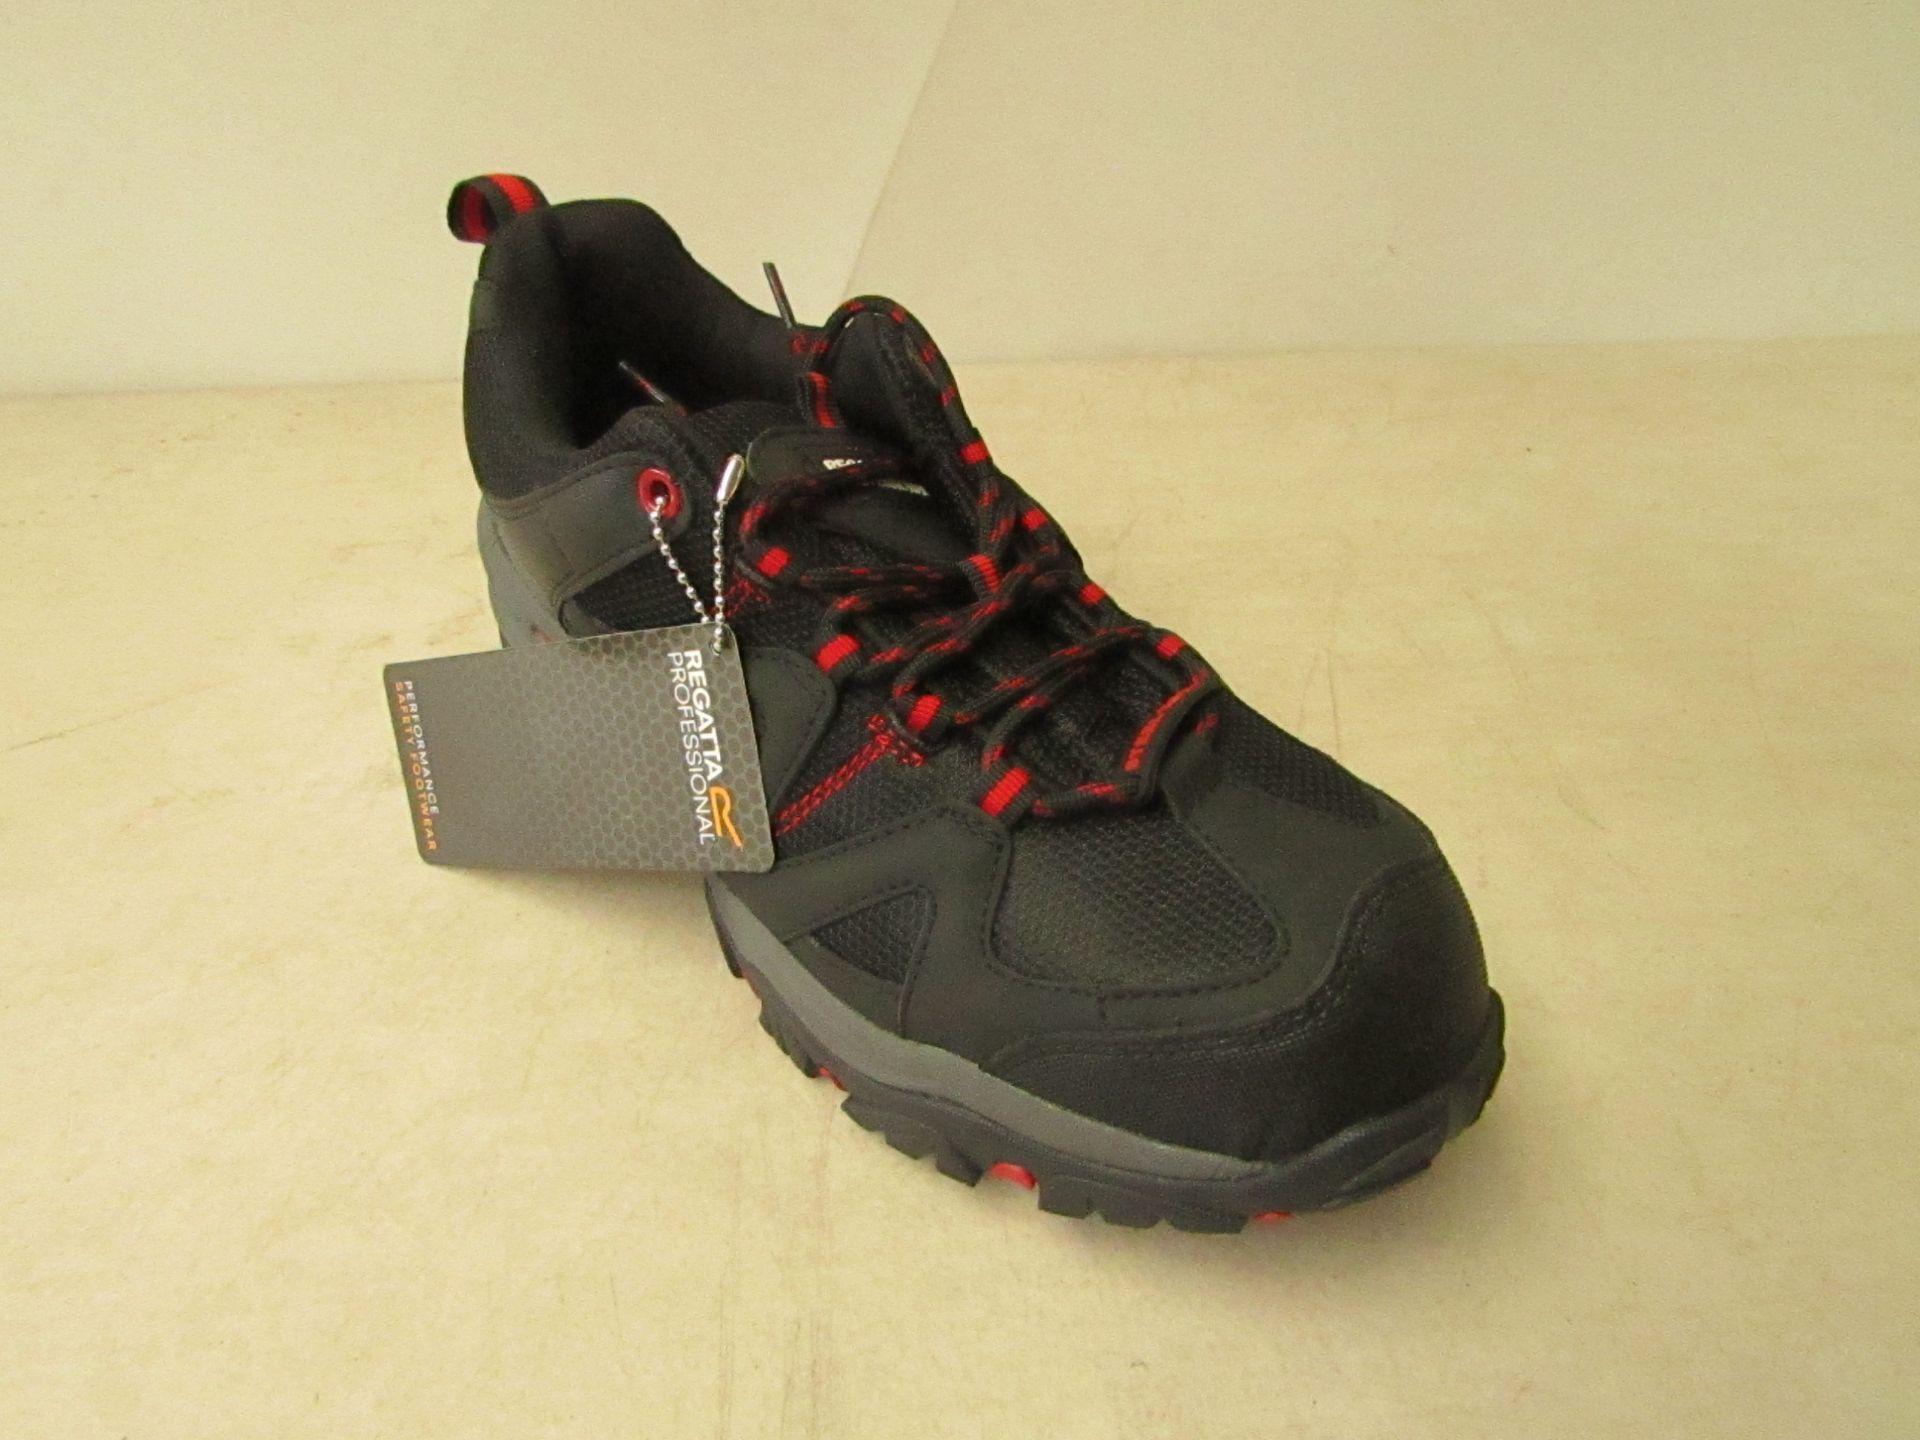 Regatta Professional Riverback safety trainers, black and red colour, size 8, new and boxed.